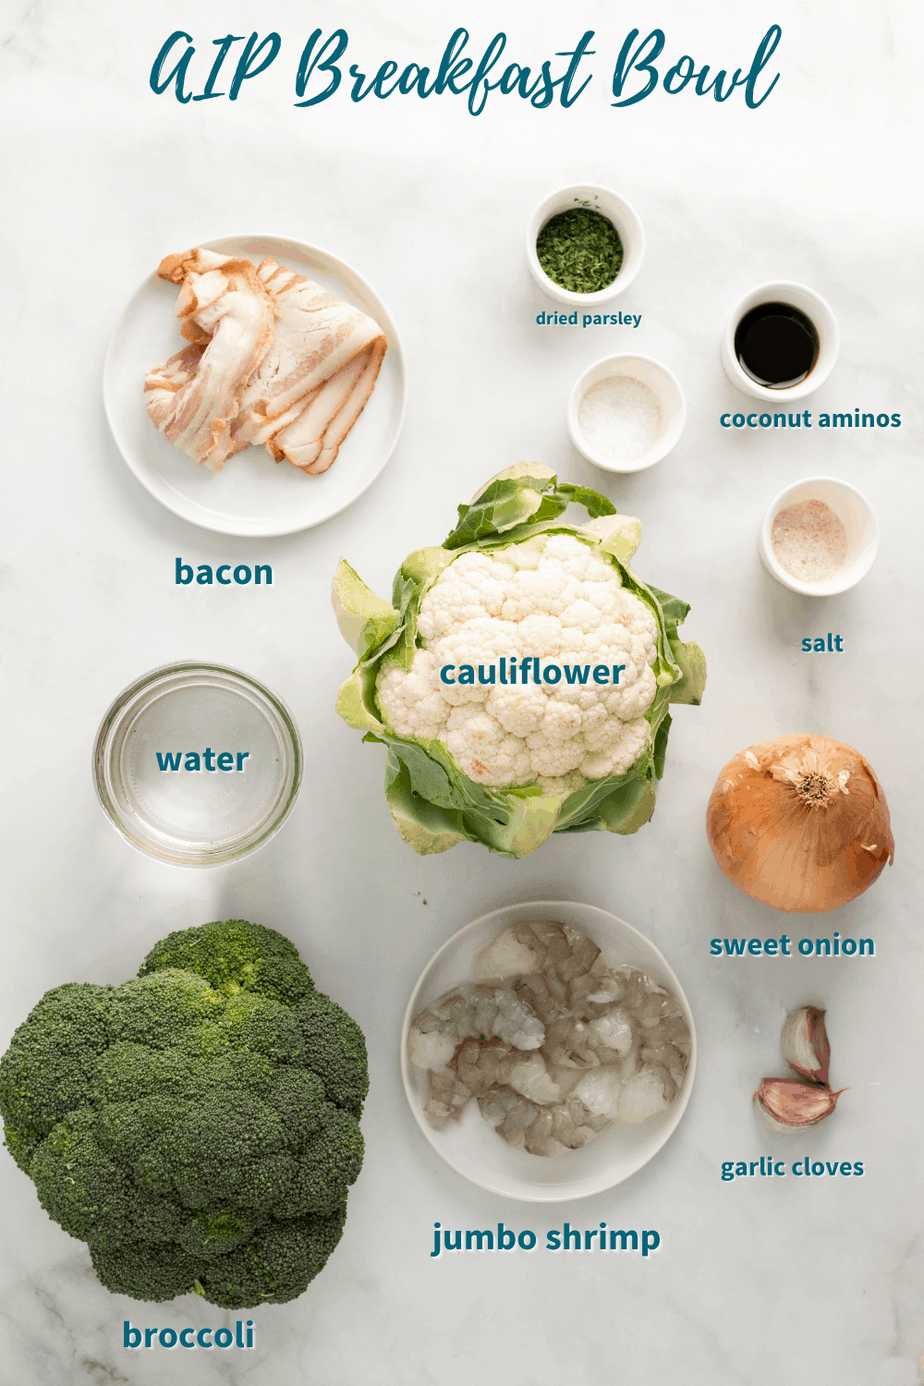 aip breakfast bowl ingredients spread out on counter top; bacon, dried parsley, coconut aminos, salt, water, cauliflower, sweet onion, jumbo shrimp, broccoli, garlic cloves